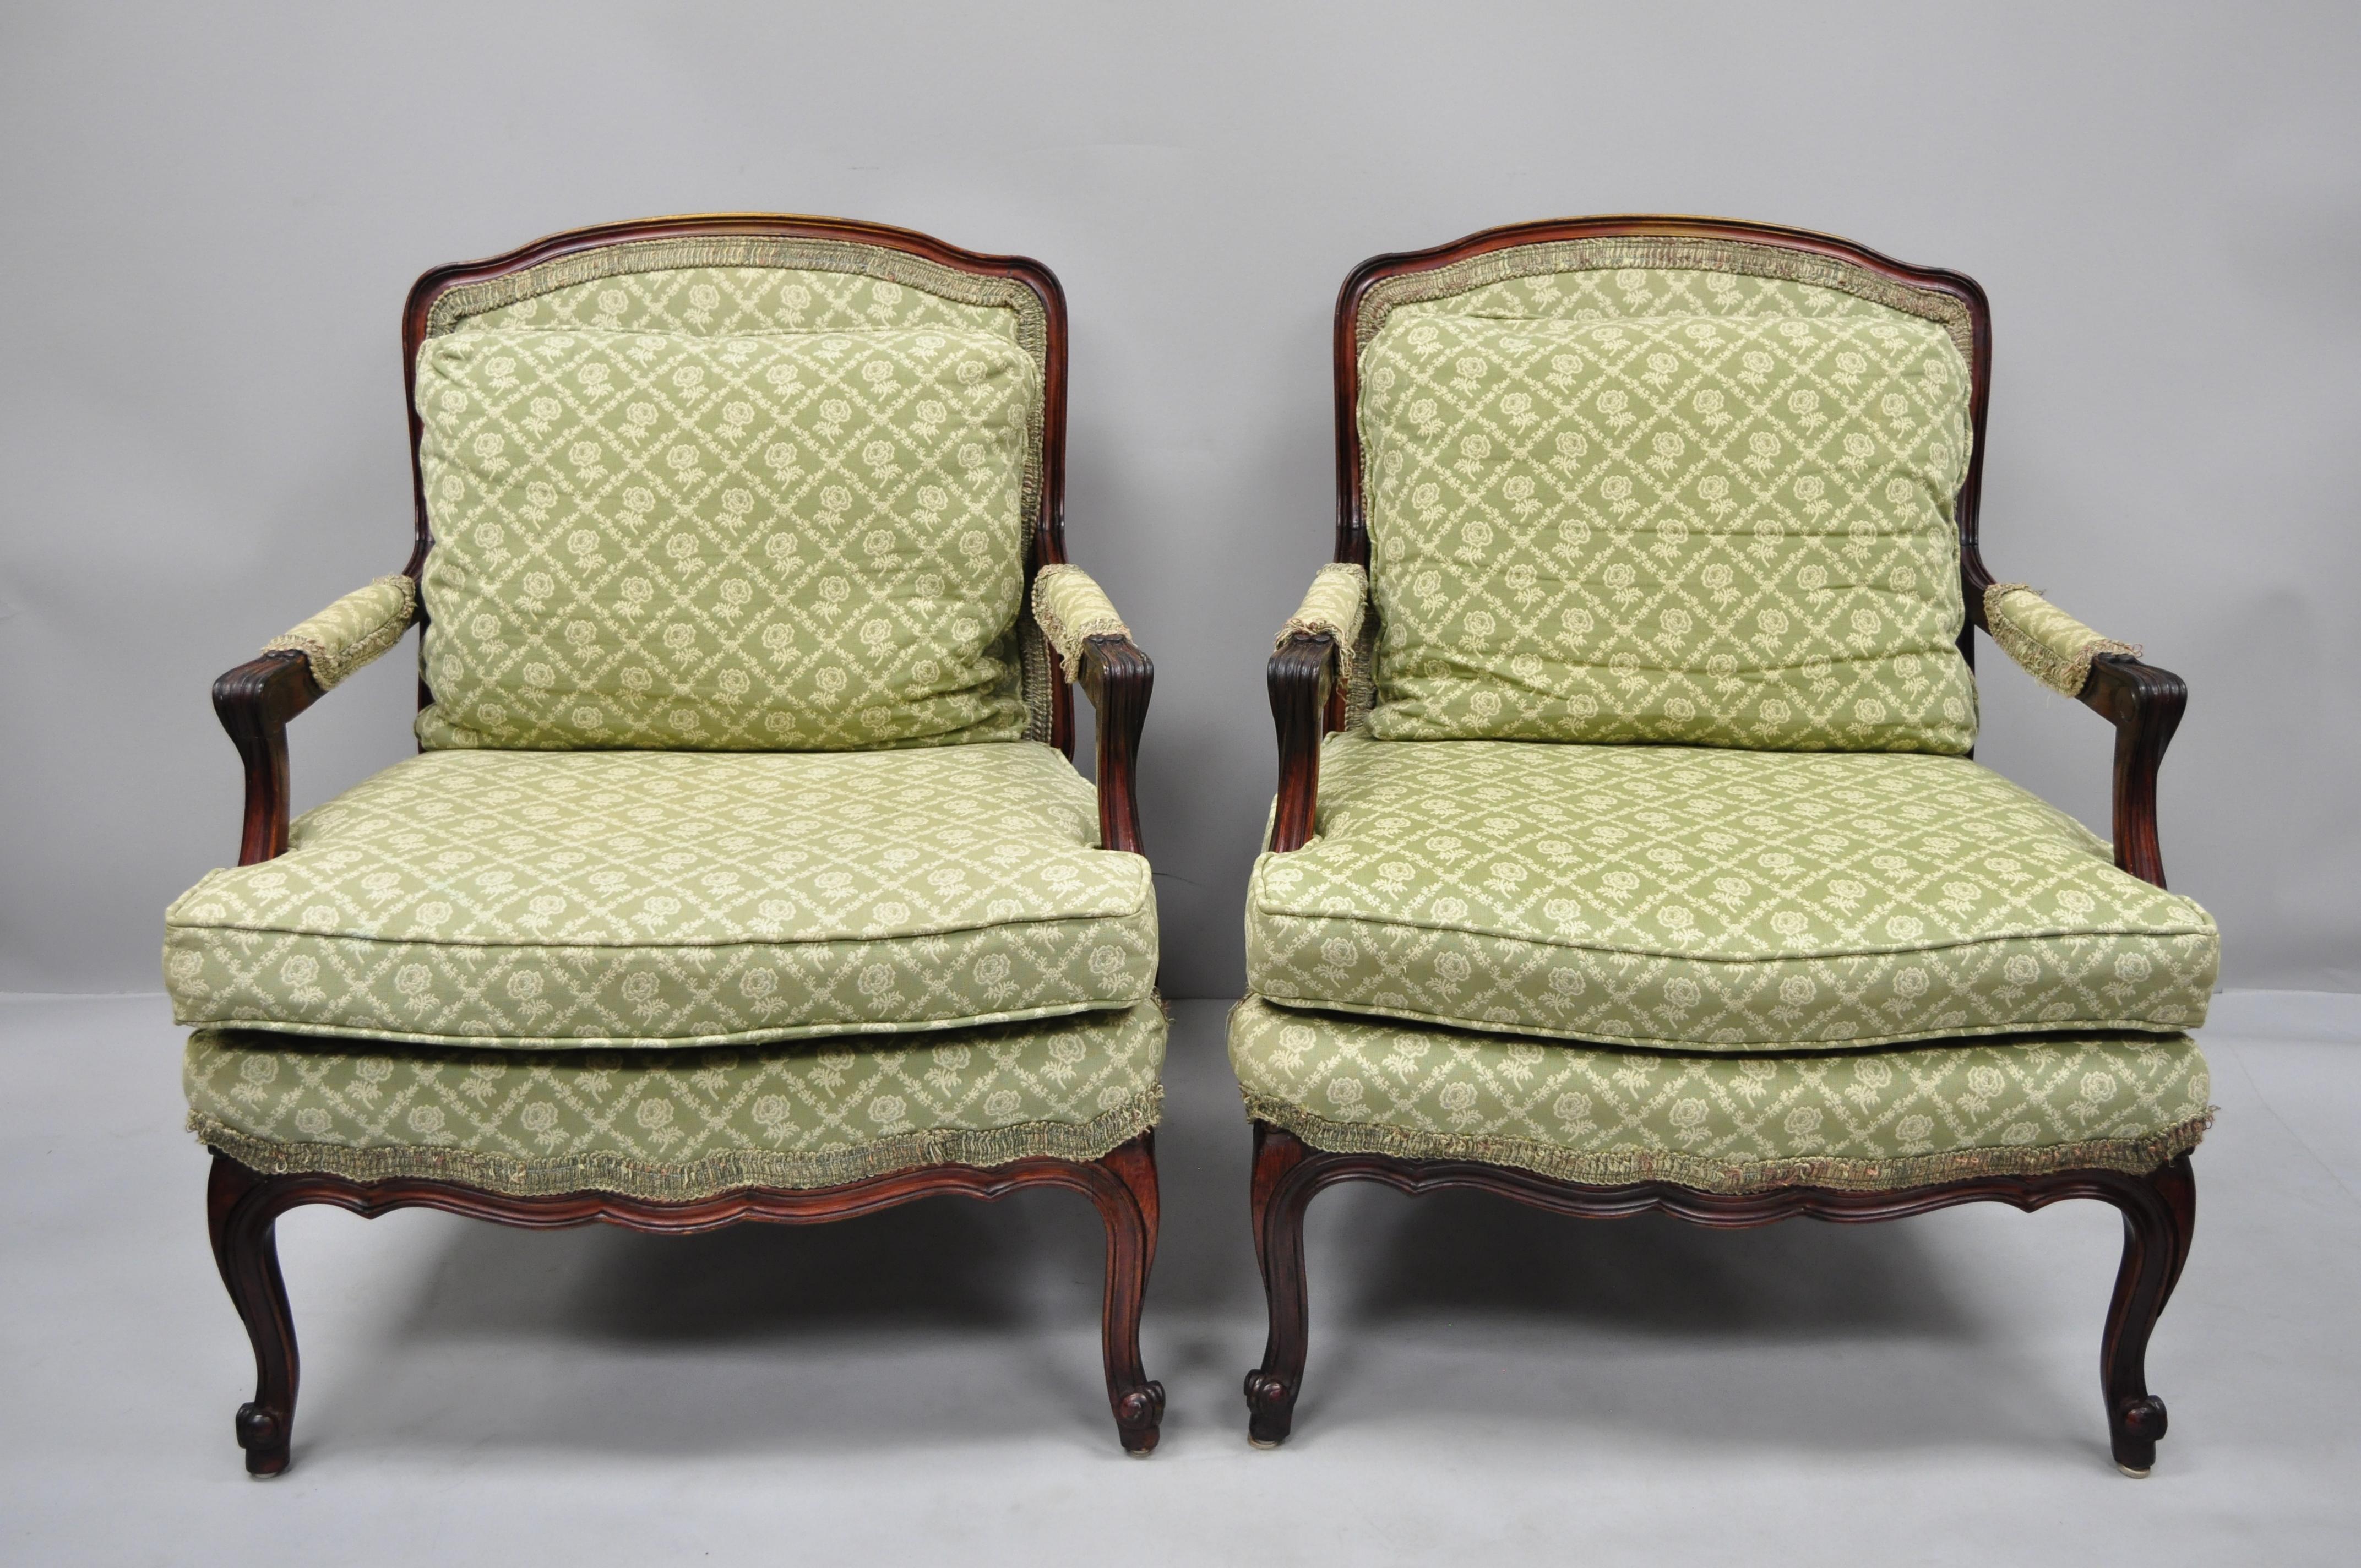 Pair of French Country Louis XV style mahogany Bergere armchairs. Item features nice wide seats, green fabric with floral pattern, solid wood construction, upholstered armrests, distressed finish, cabriole legs, great style and form, circa mid-20th